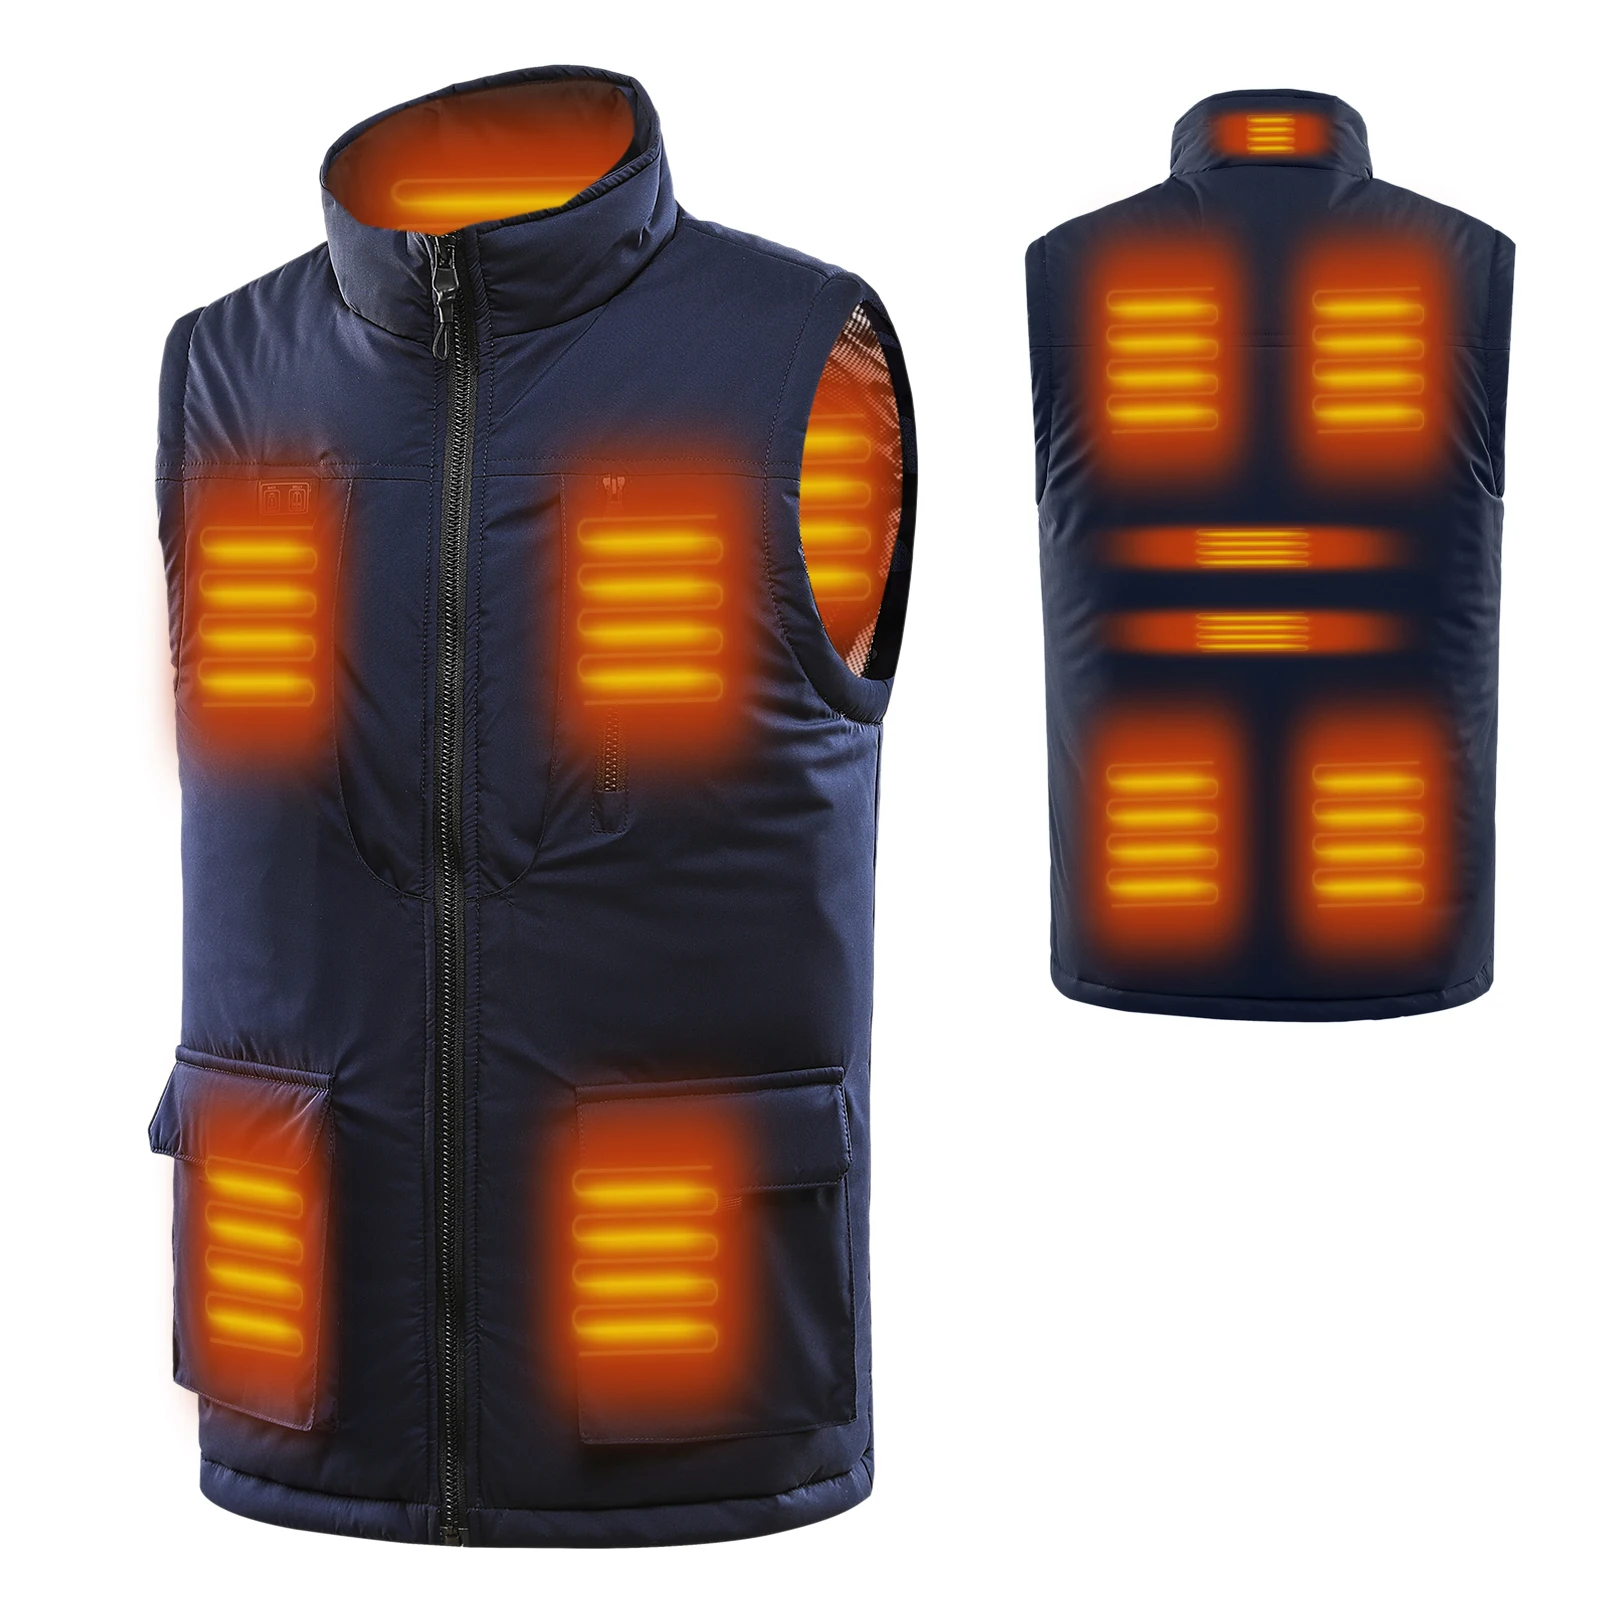 Electric USB Charging Body Warmer Fall Winter Warm Clothes for Outdoor Hiking Fishing Camping 25-45℃ shenruifa Heated Vest Jacket for Men and Womens Adjustable Temperature 